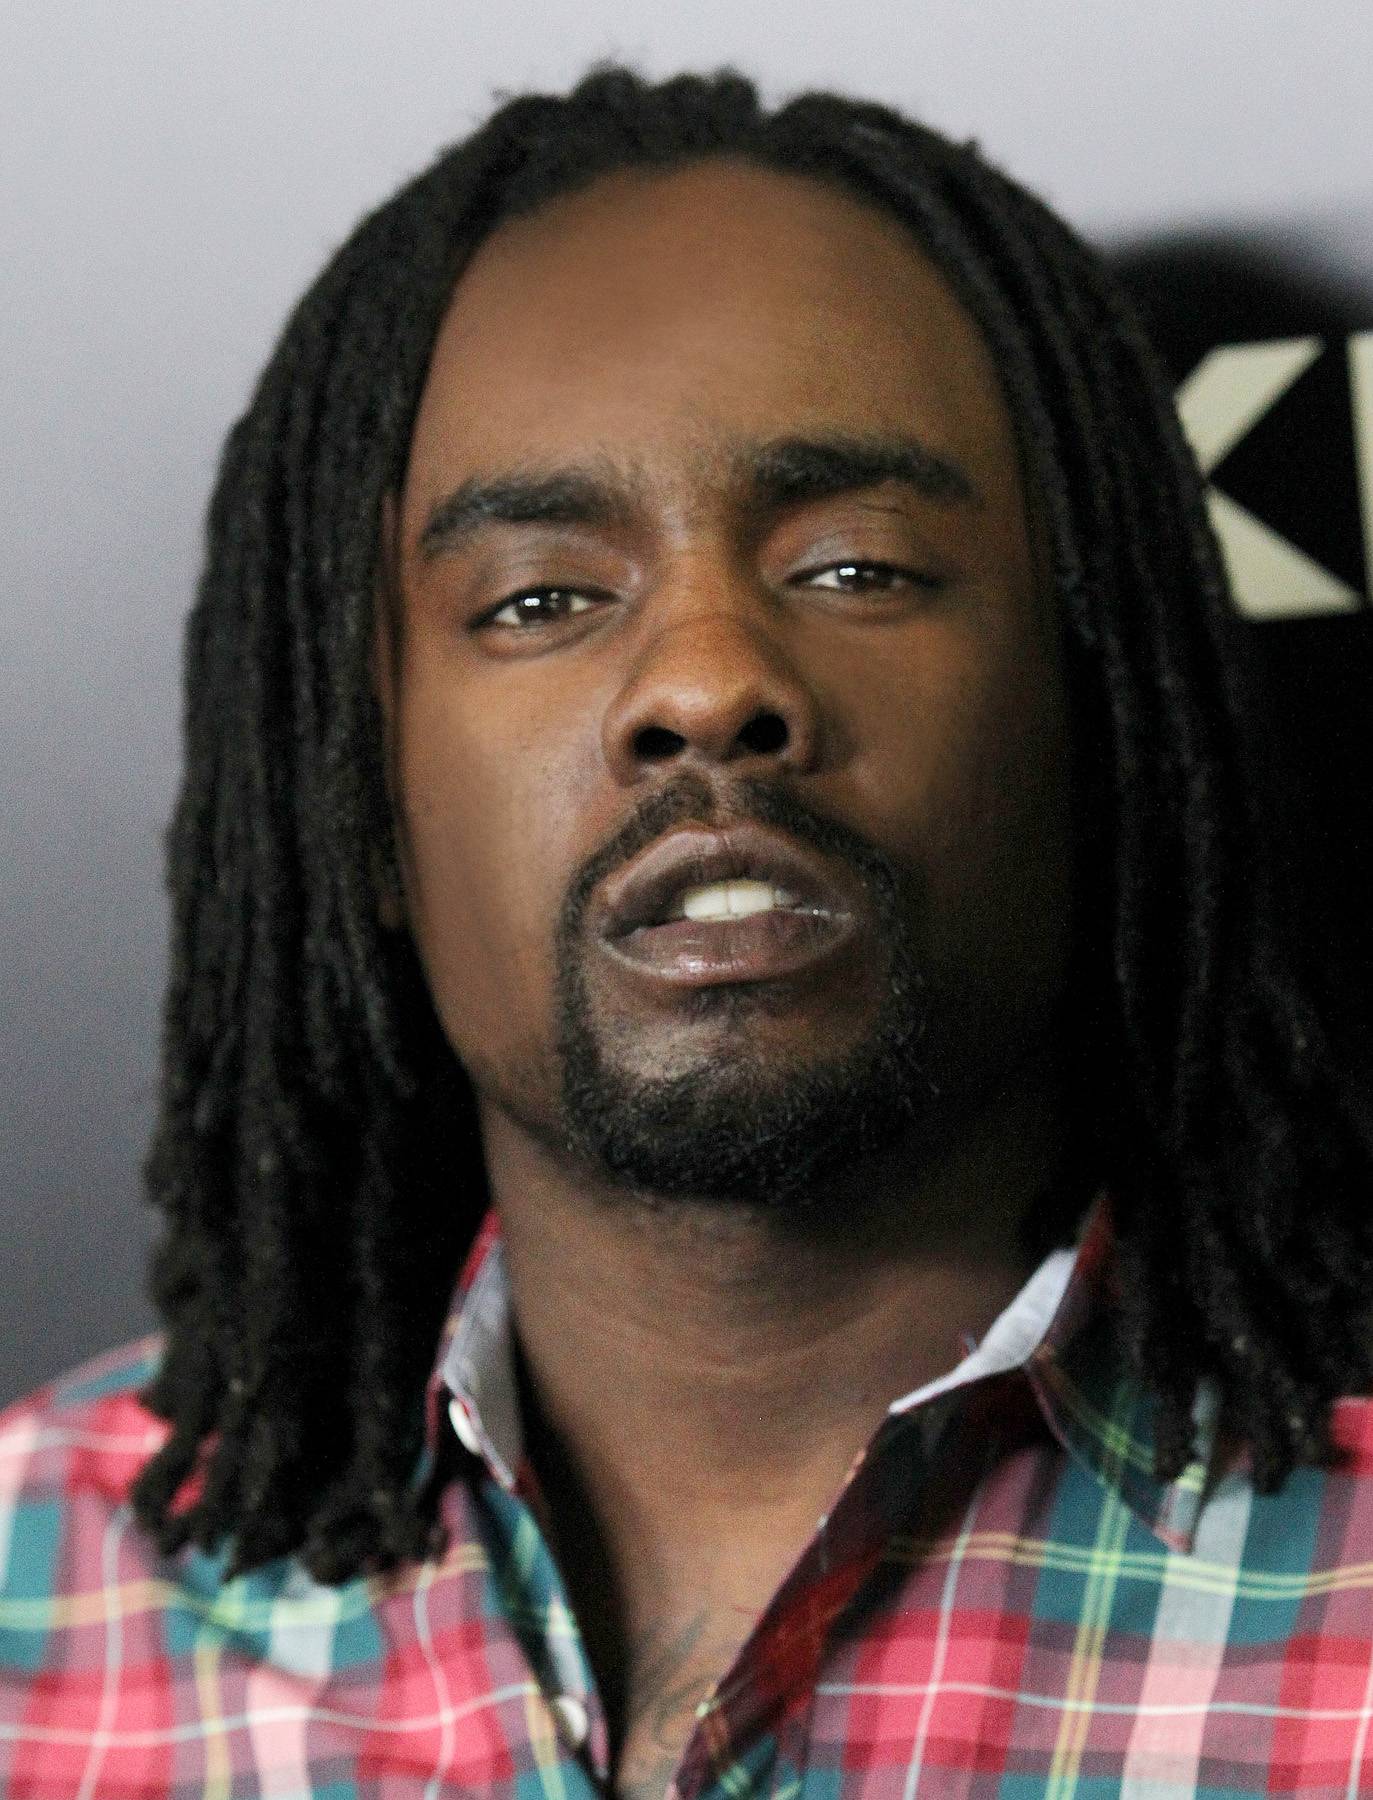 Wale (@Wale)&nbsp; - TWEET: &quot;RIP to the Legend …Chuck Brown. u will be missed worldwide&quot;&nbsp;DC rep Wale honors the Godfather of go-go after he passed away this week.&nbsp;&nbsp;(Photo: Frederick M. Brown/Getty Images)